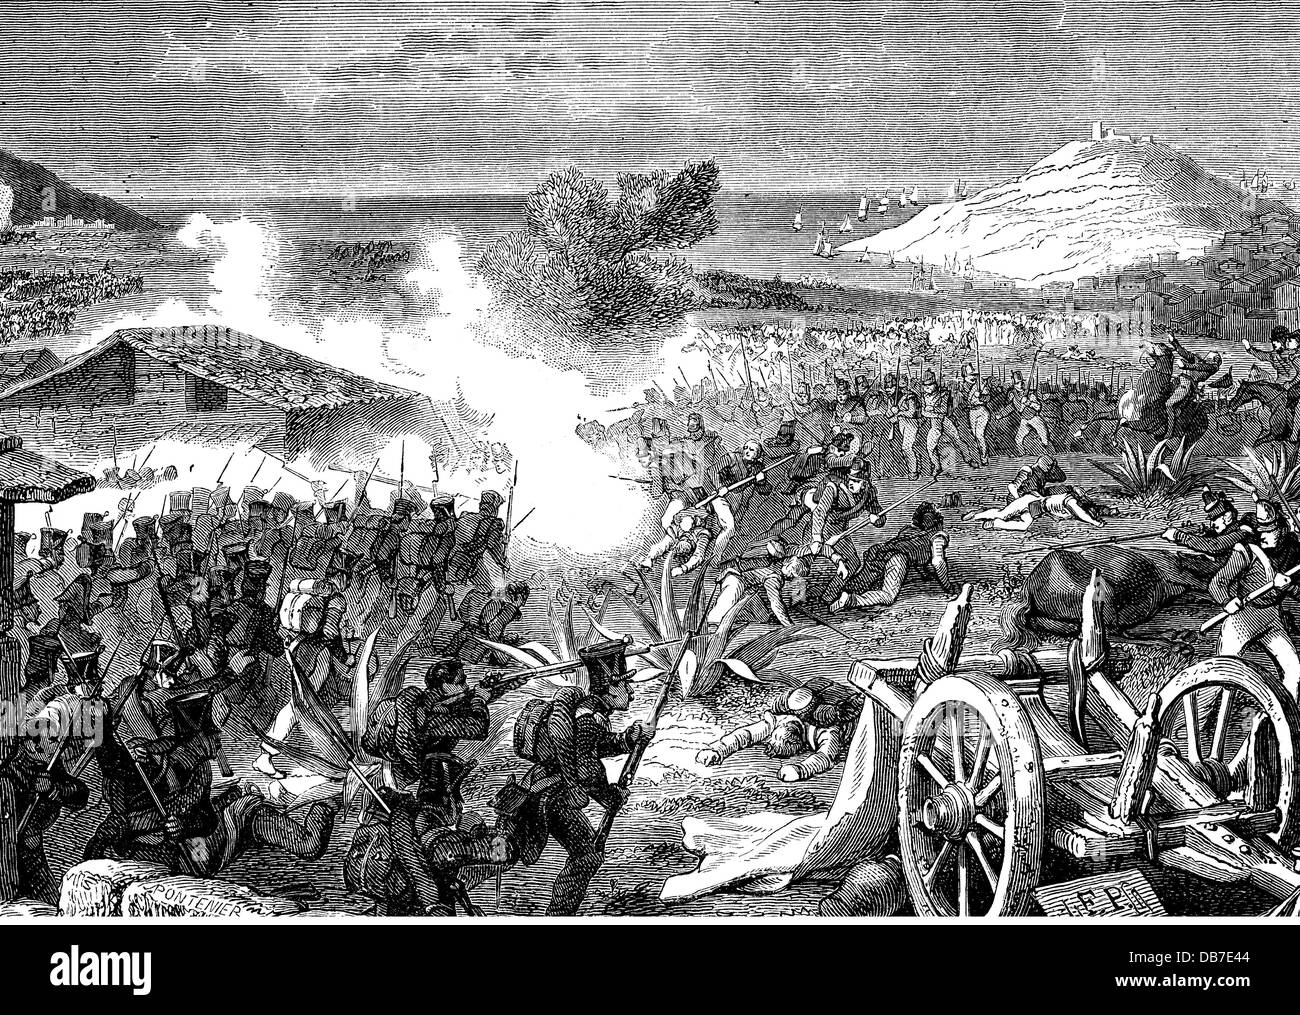 Peninsula War 1808 - 1814, Battle of Corunna, 16.1.1809, death of the British general Sir John Moore, wood engraving, 19th century, charge, infantry, soldiers, soldier, Britons, French, Great Britain, First Empire, France, Spain, Galicia, Napoleonic Wars, historic, historical, people, Additional-Rights-Clearences-Not Available Stock Photo